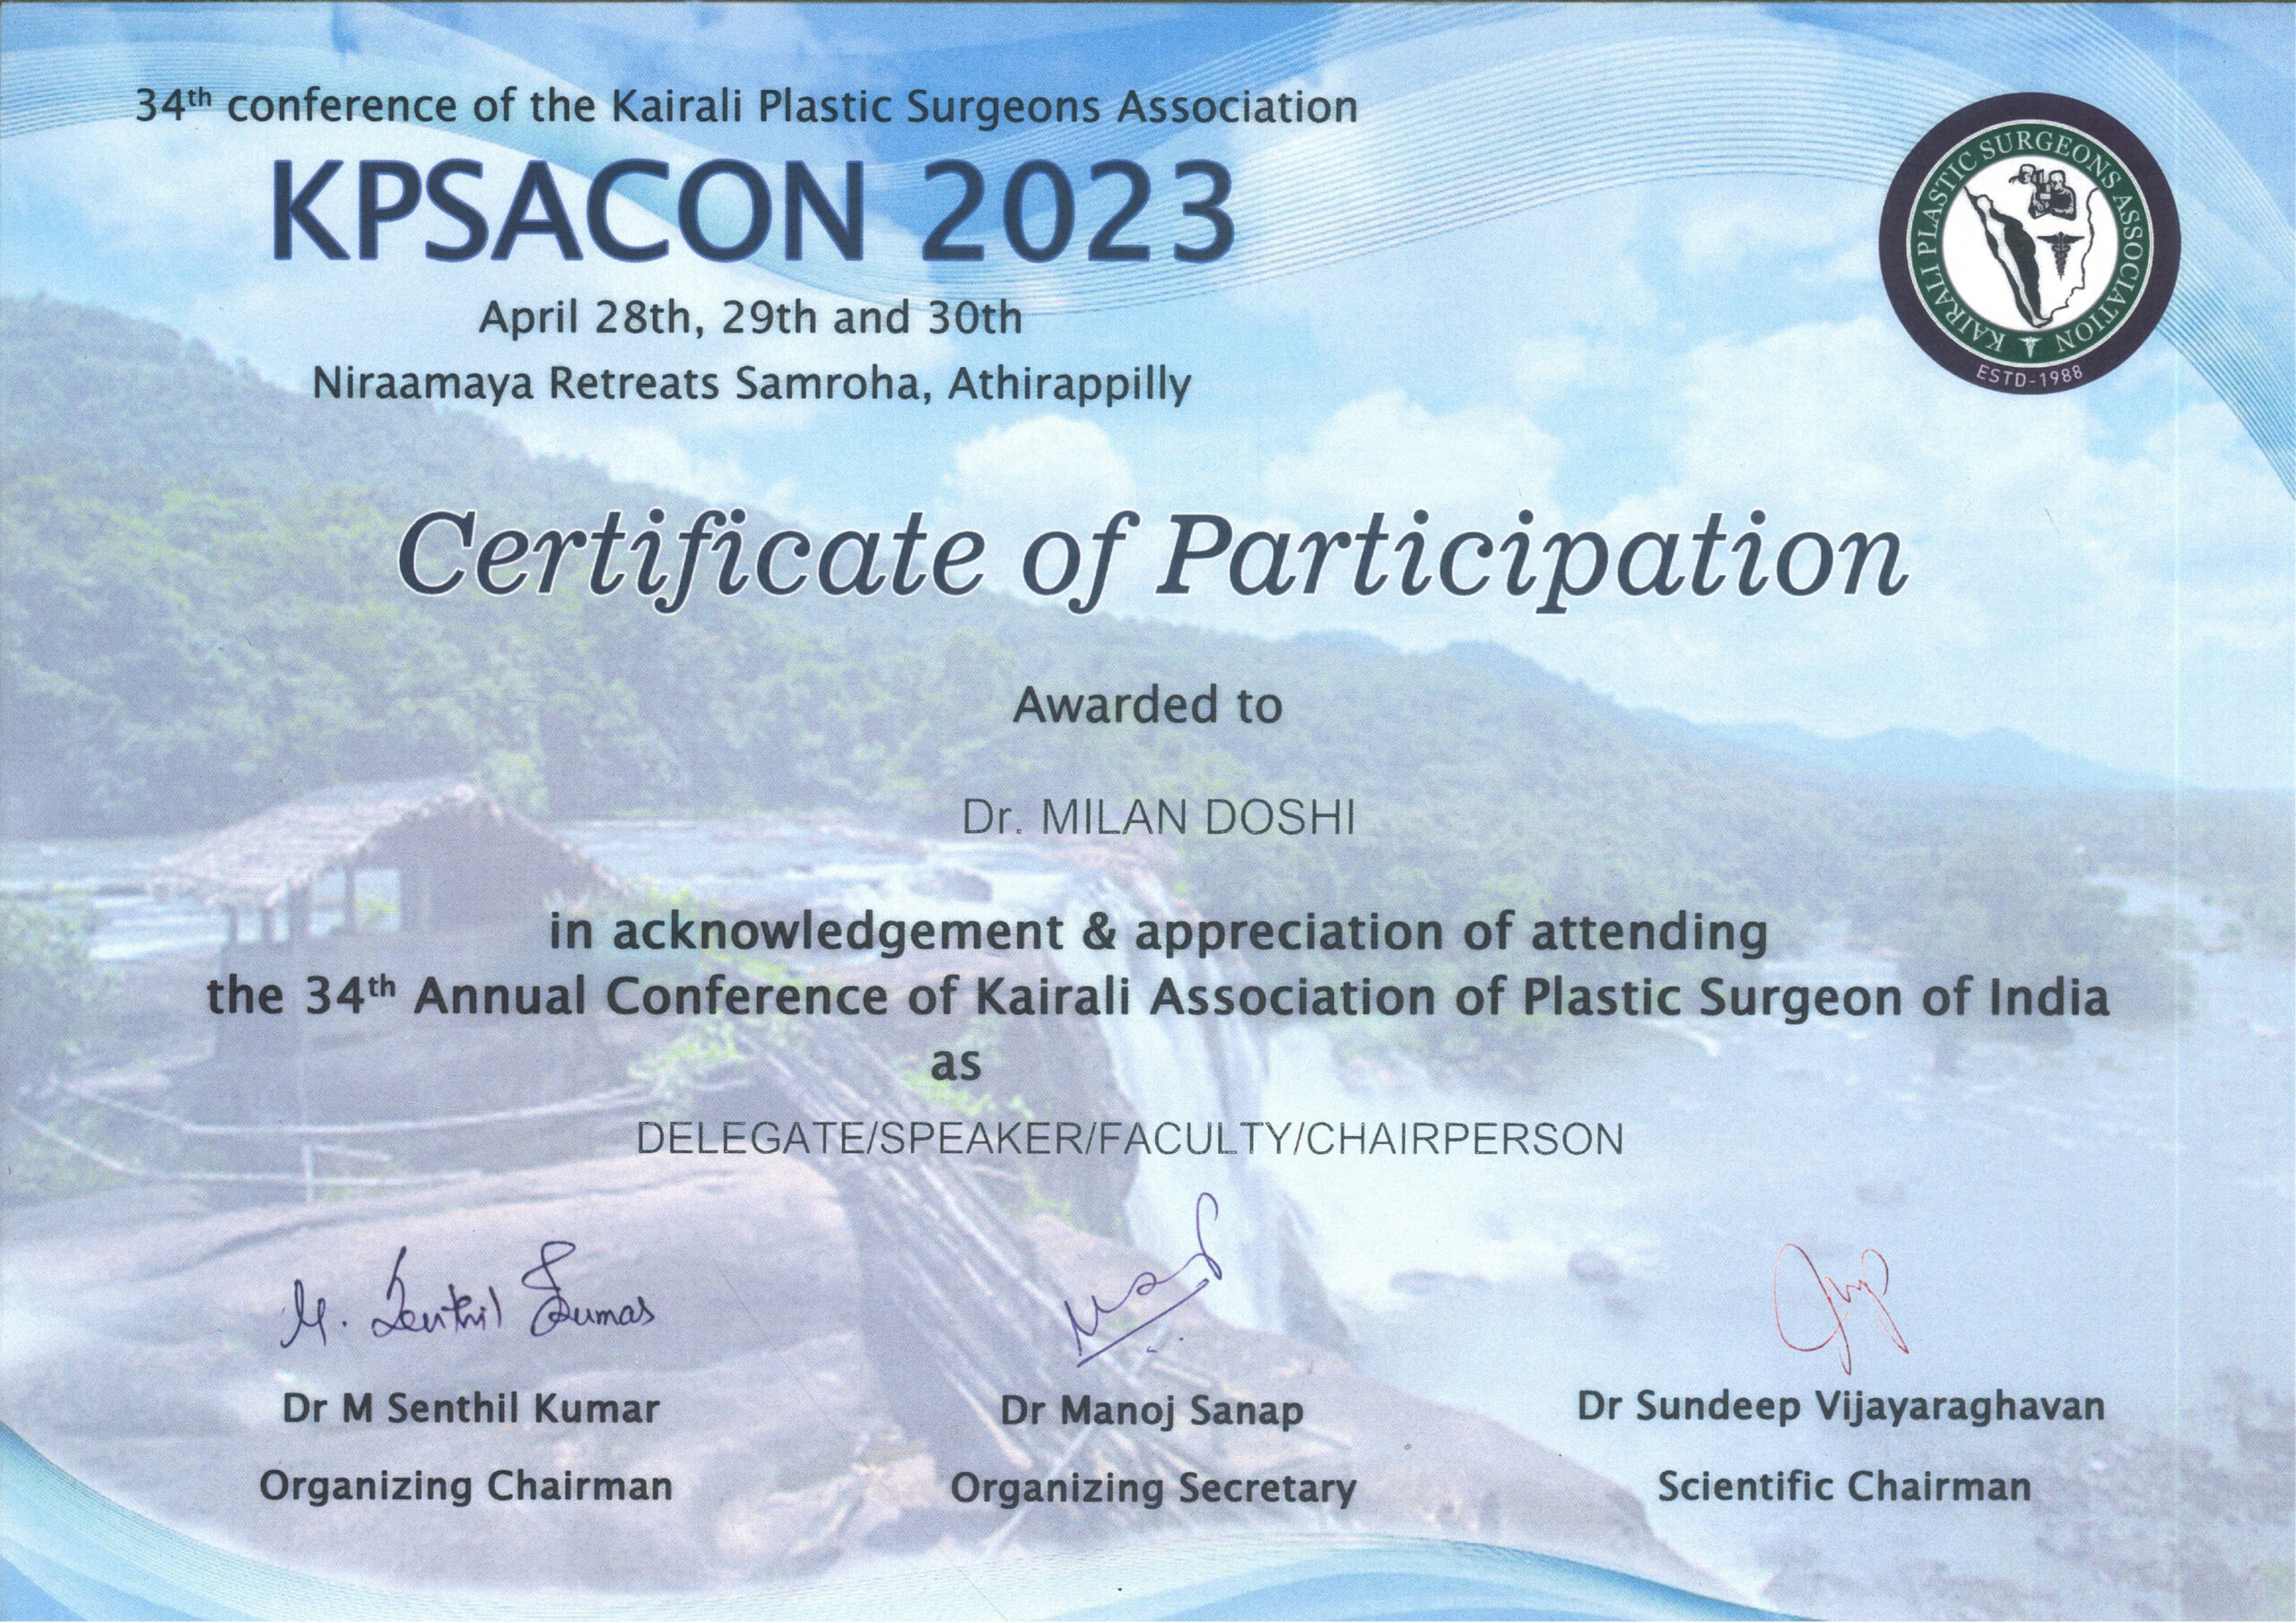 34th Annual Conference of the Kairali Plastic Surgeons Association (KPSACON) on 28th to 30th April 2023 at Athirappilly, Kerala.